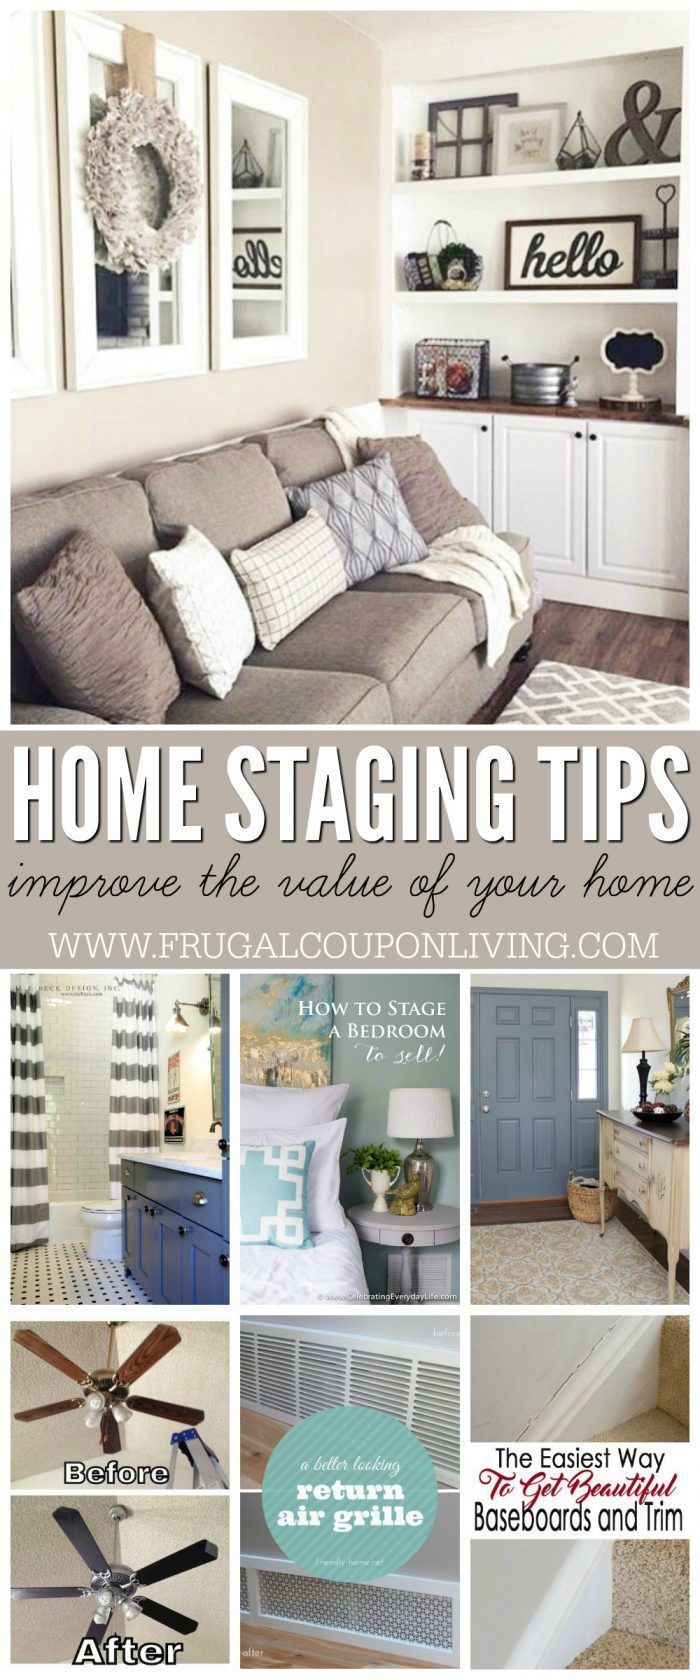 Home Staging Tips and Ideas – Improve the Value of Your Home  before a sale by highlighting your home’s strengths and